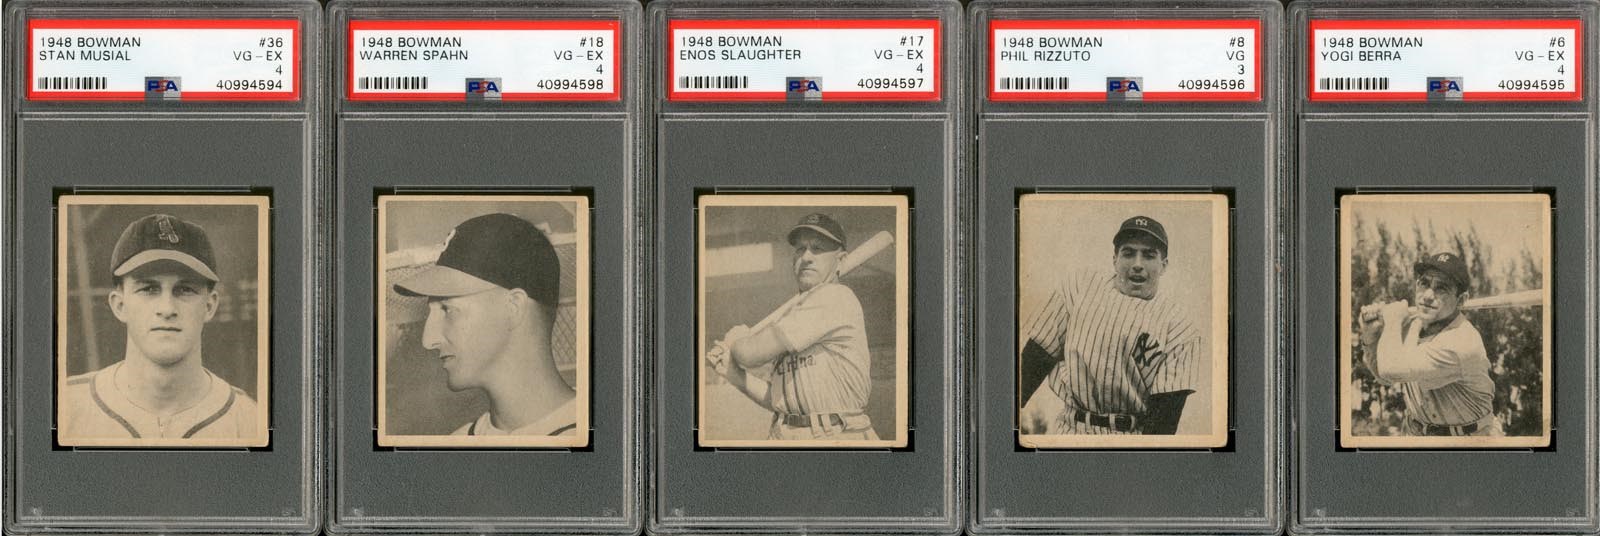 - 1948 Bowman Baseball Complete Set with (5) PSA Graded